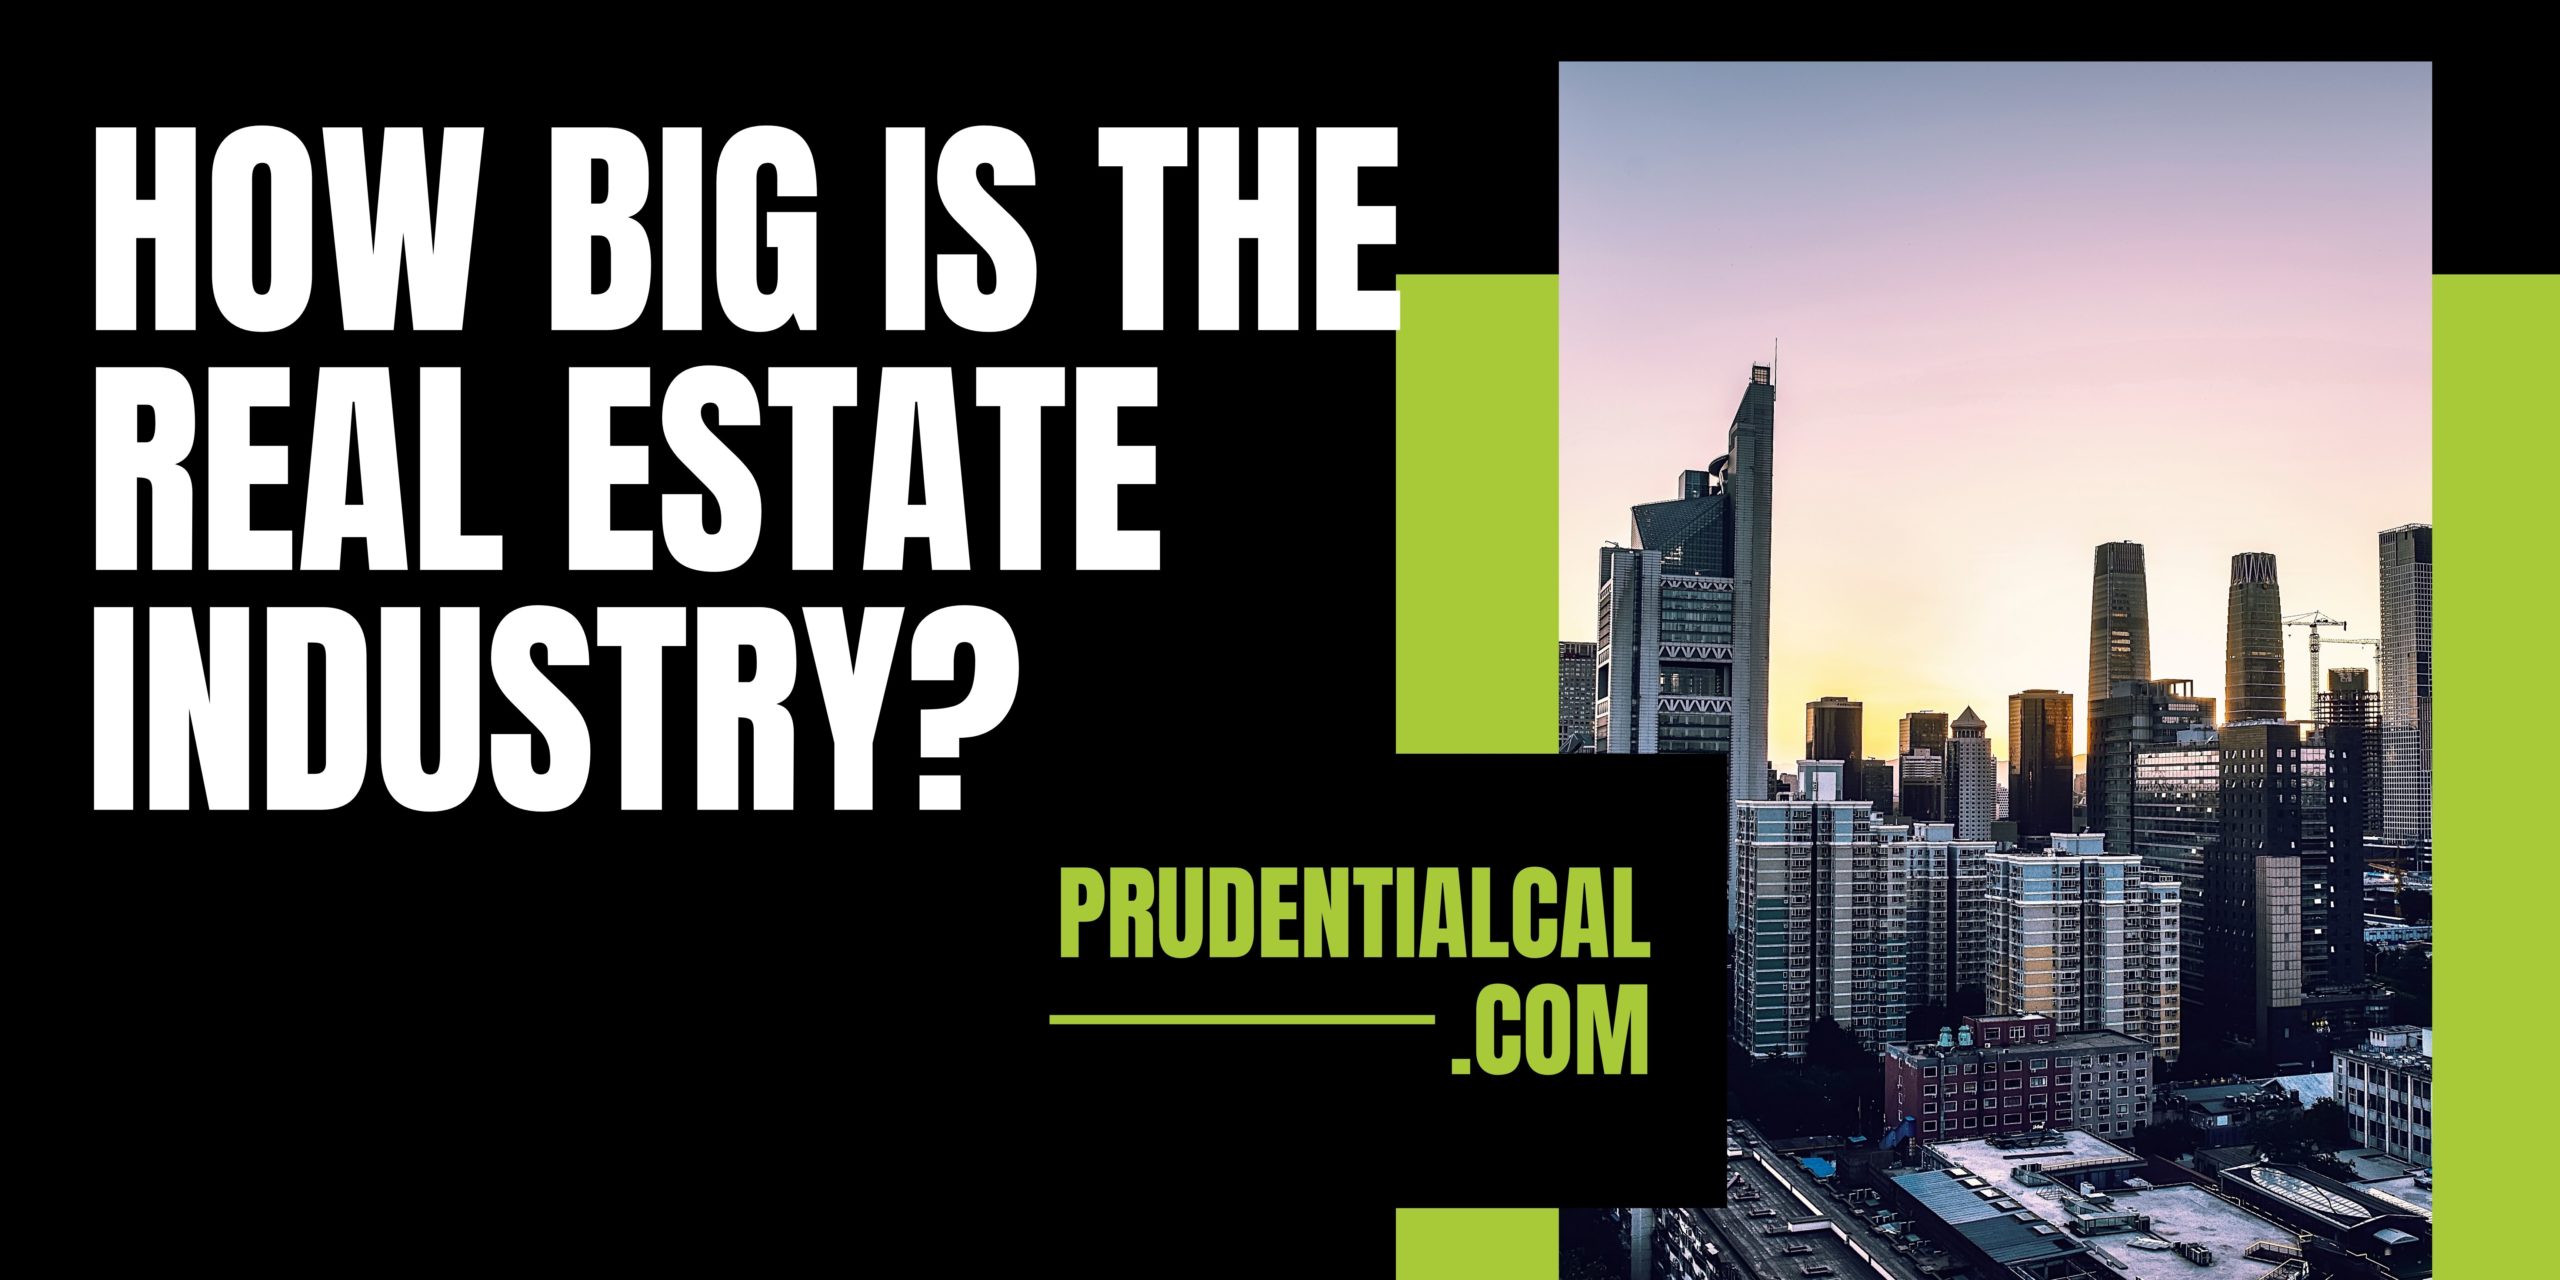 How Big Is The Real Estate Industry?